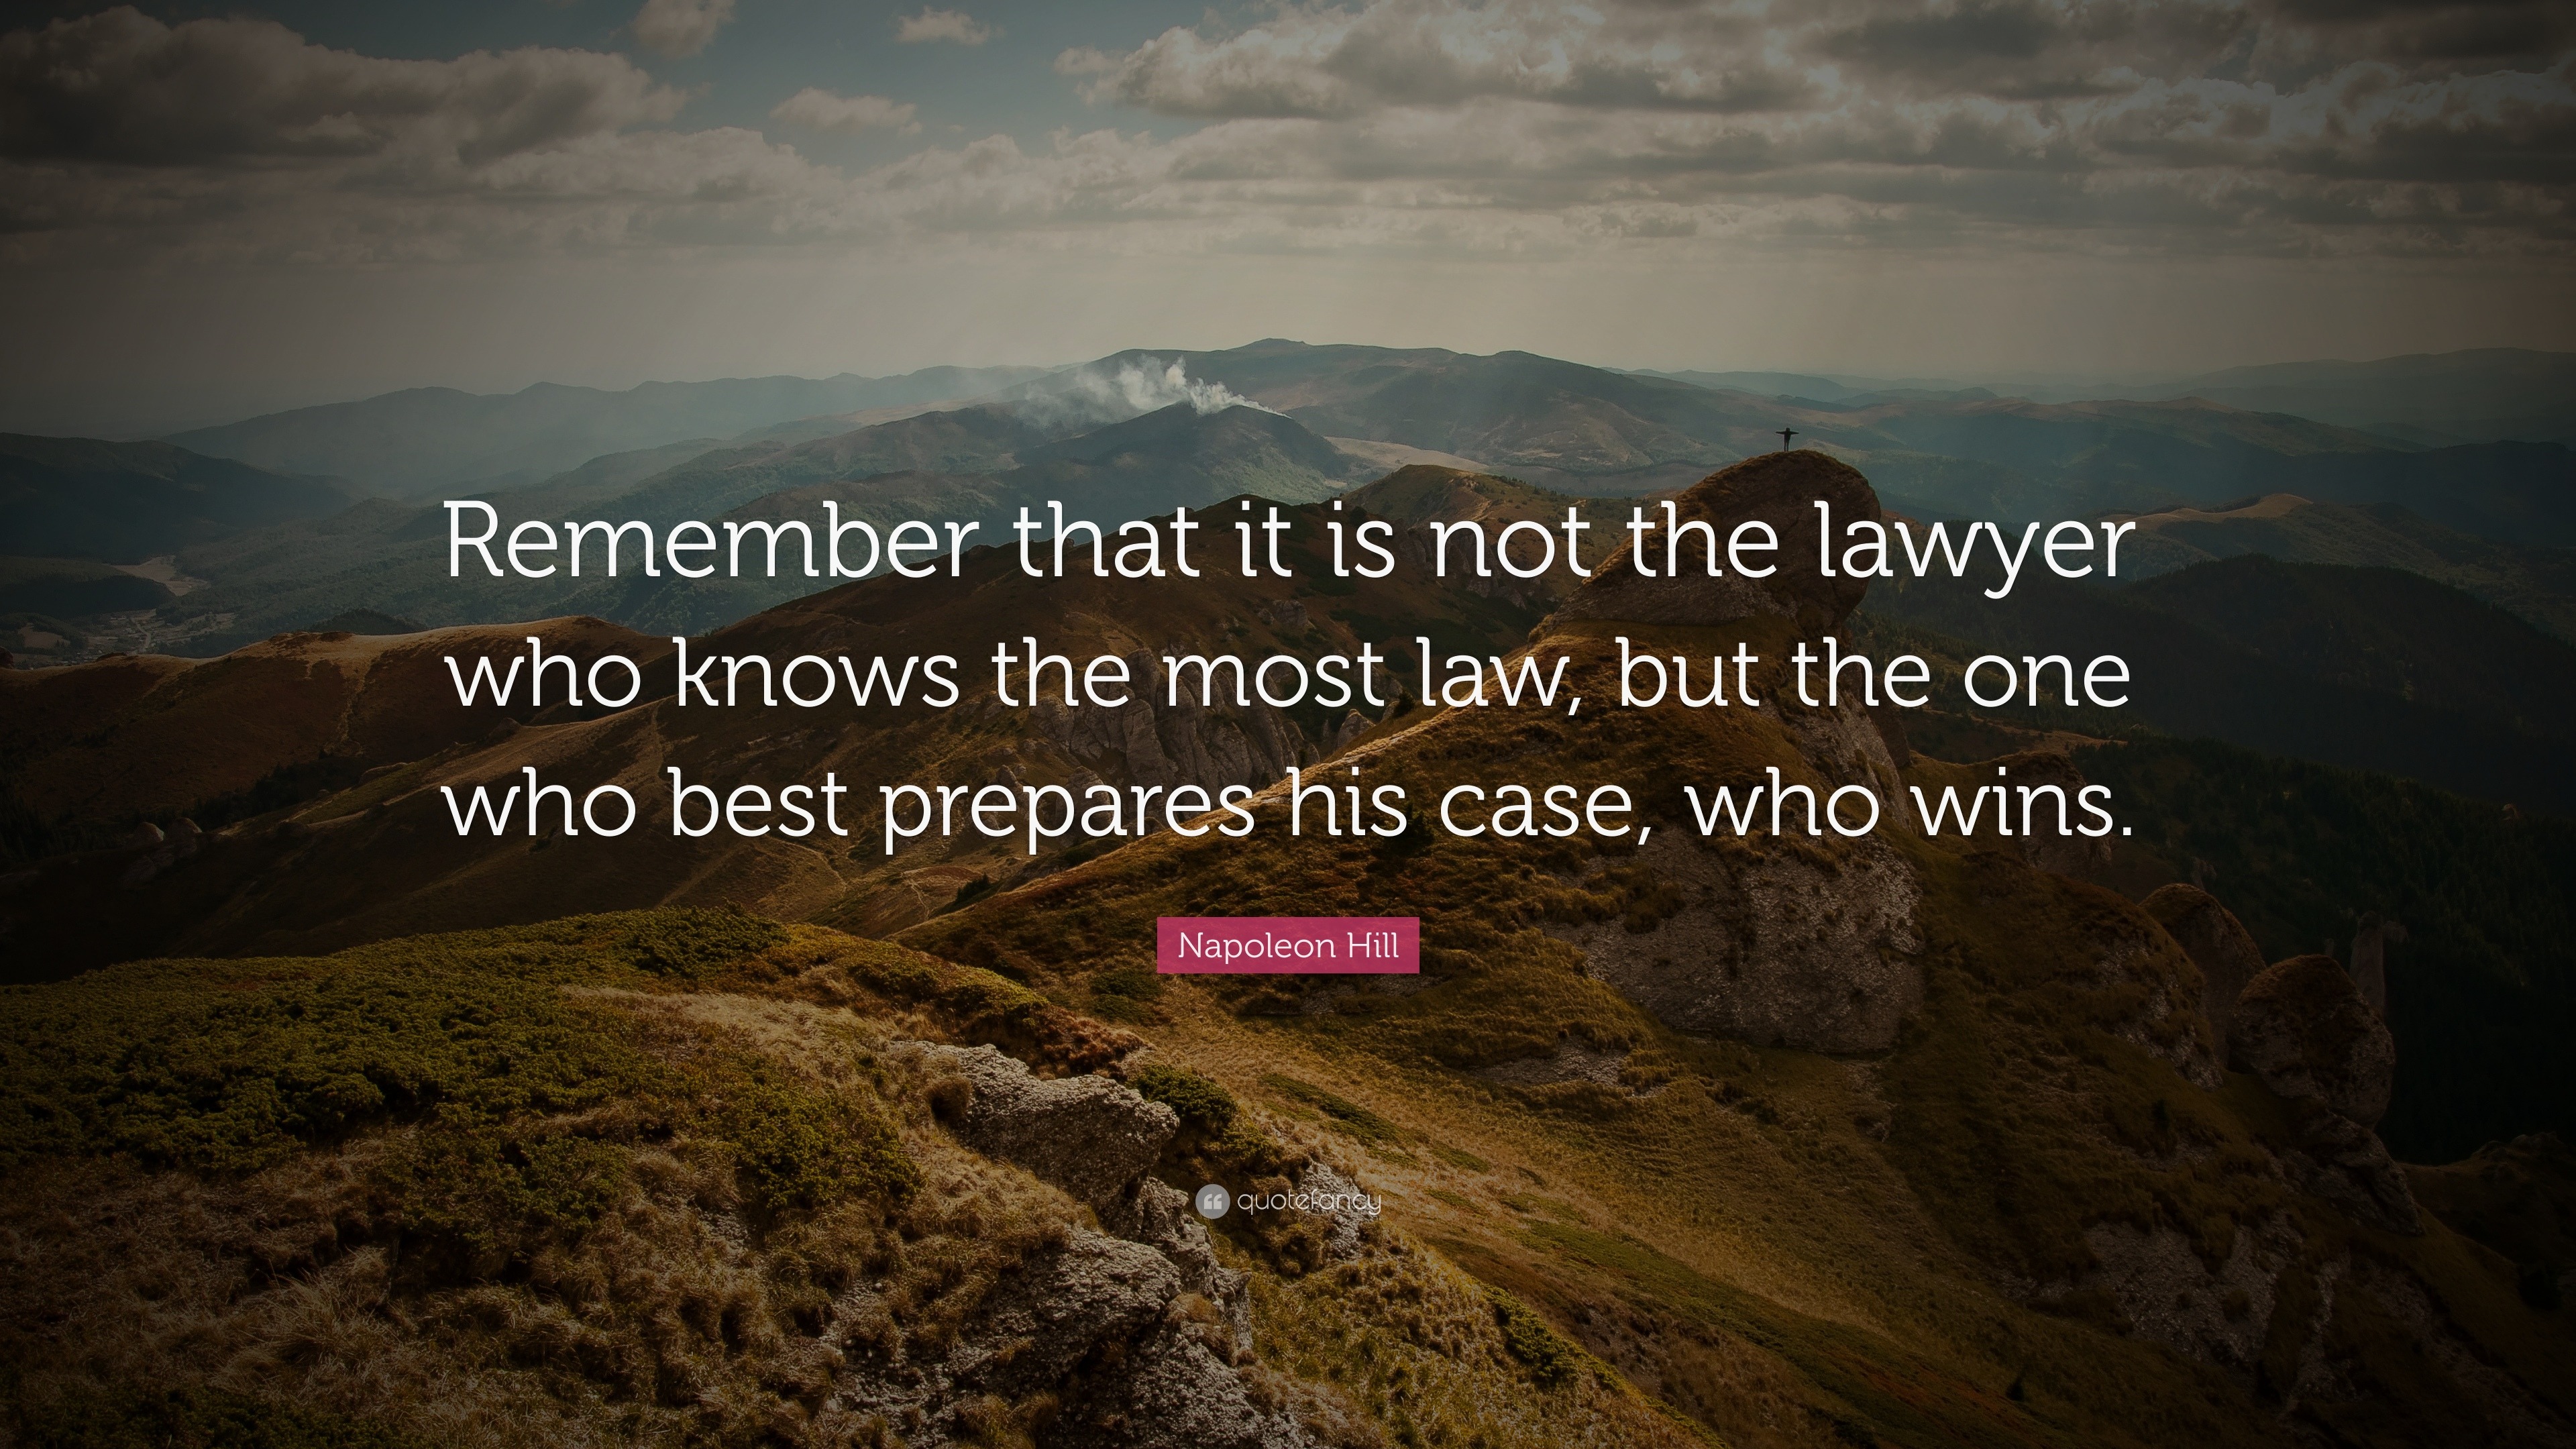 Napoleon Hill Quote: "Remember that it is not the lawyer ...